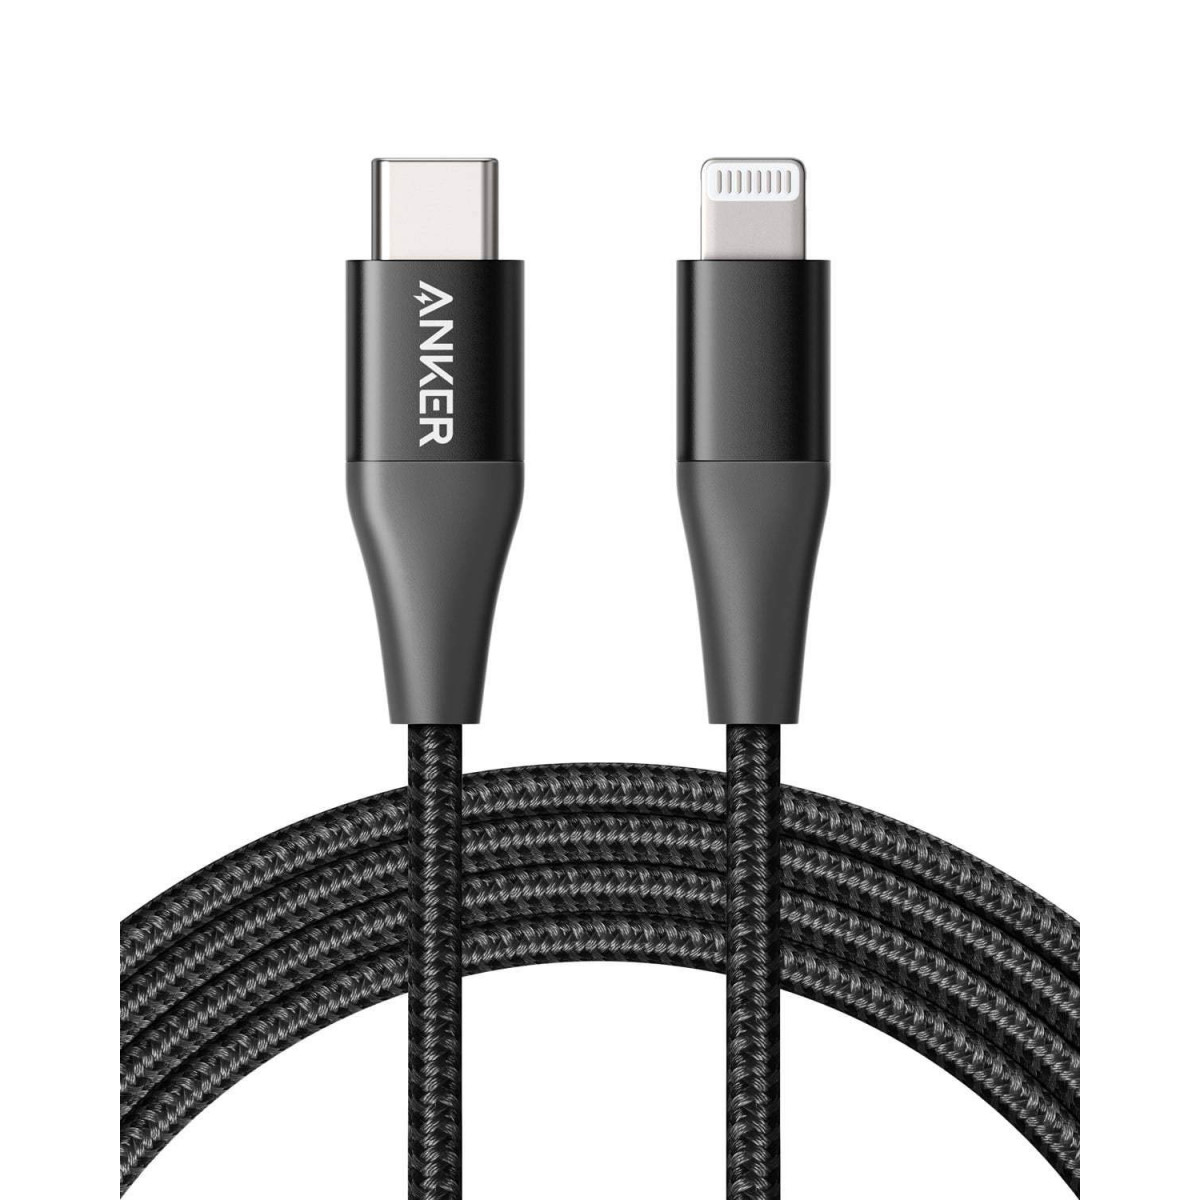 Anker Iphone 11 Charger Usb C To Lightning Cable 3882